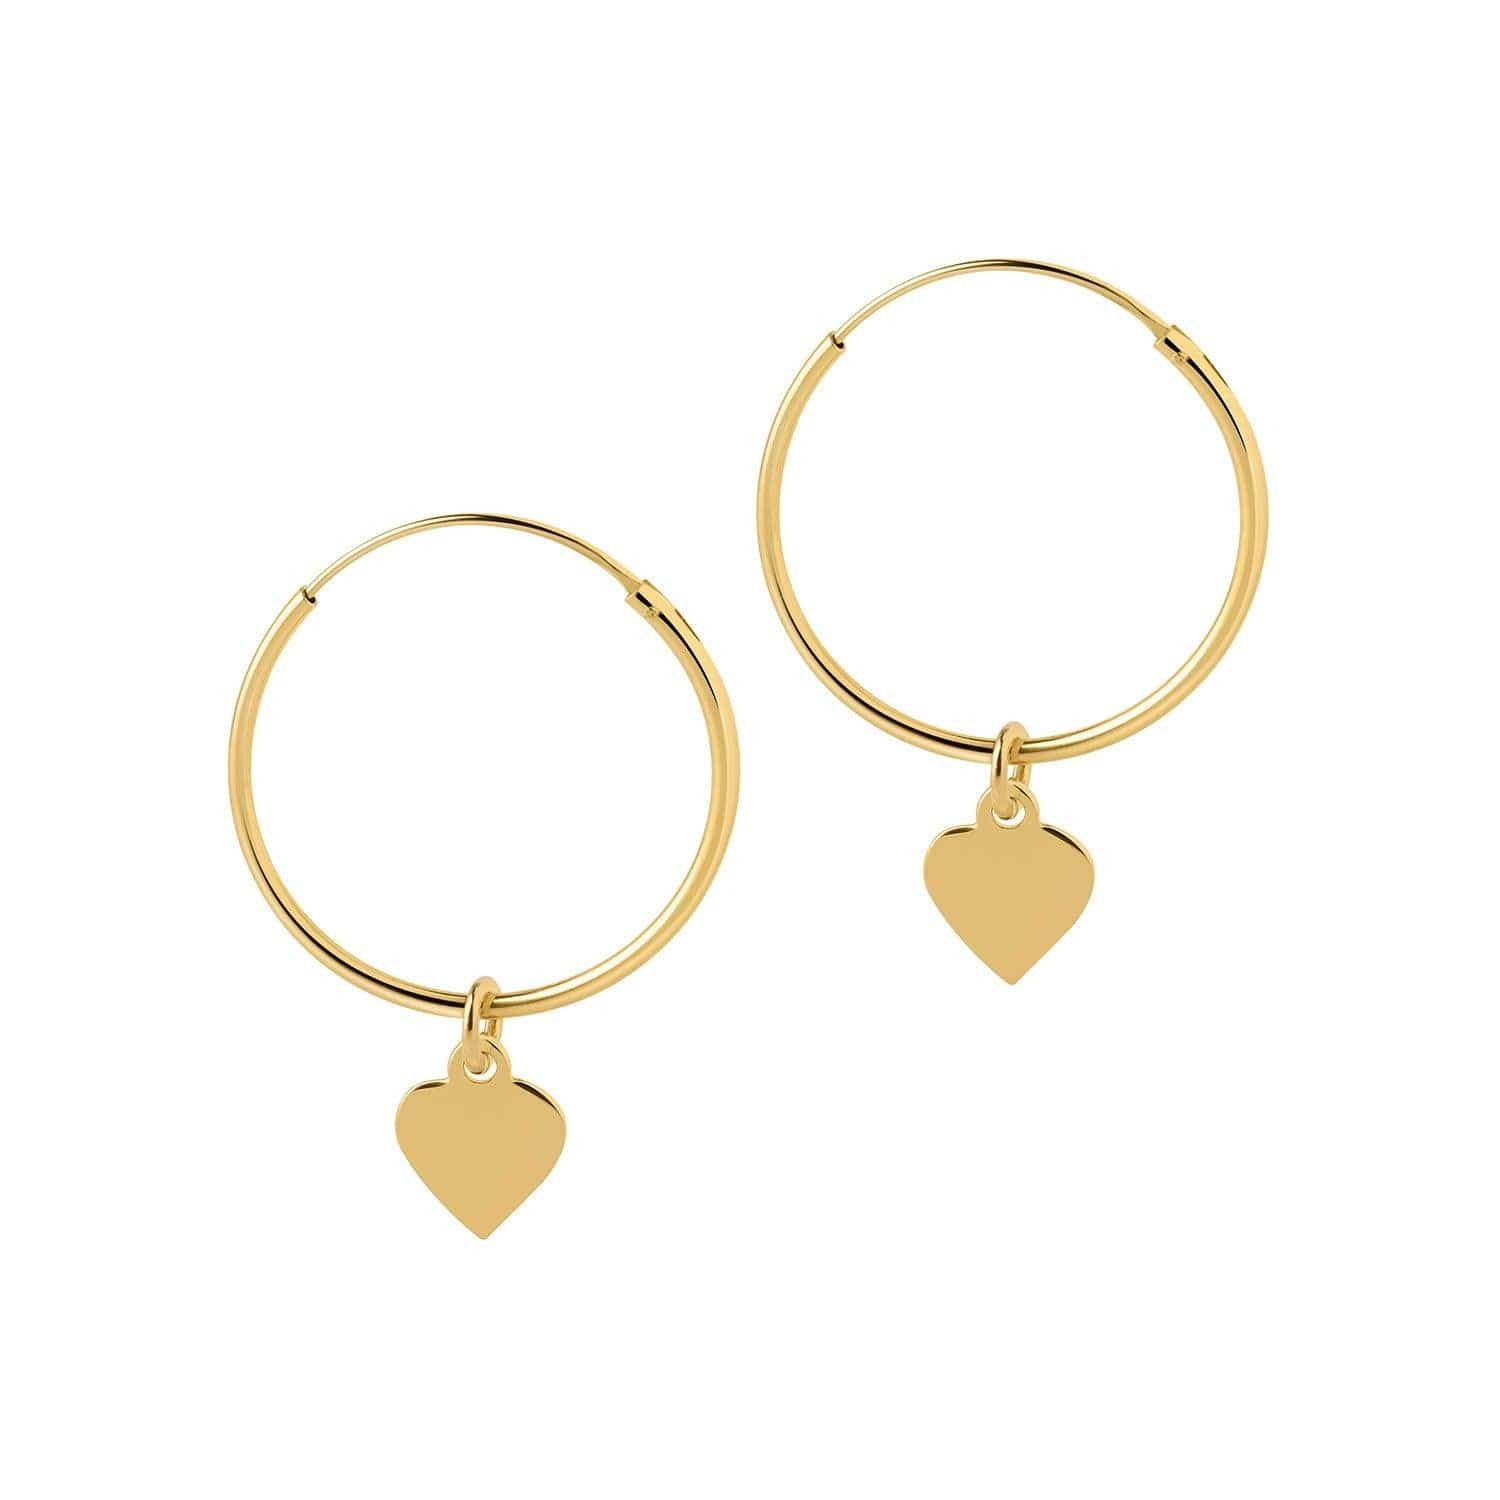 Hoop Earrings with Pendant Heart Gold Plated 22MM